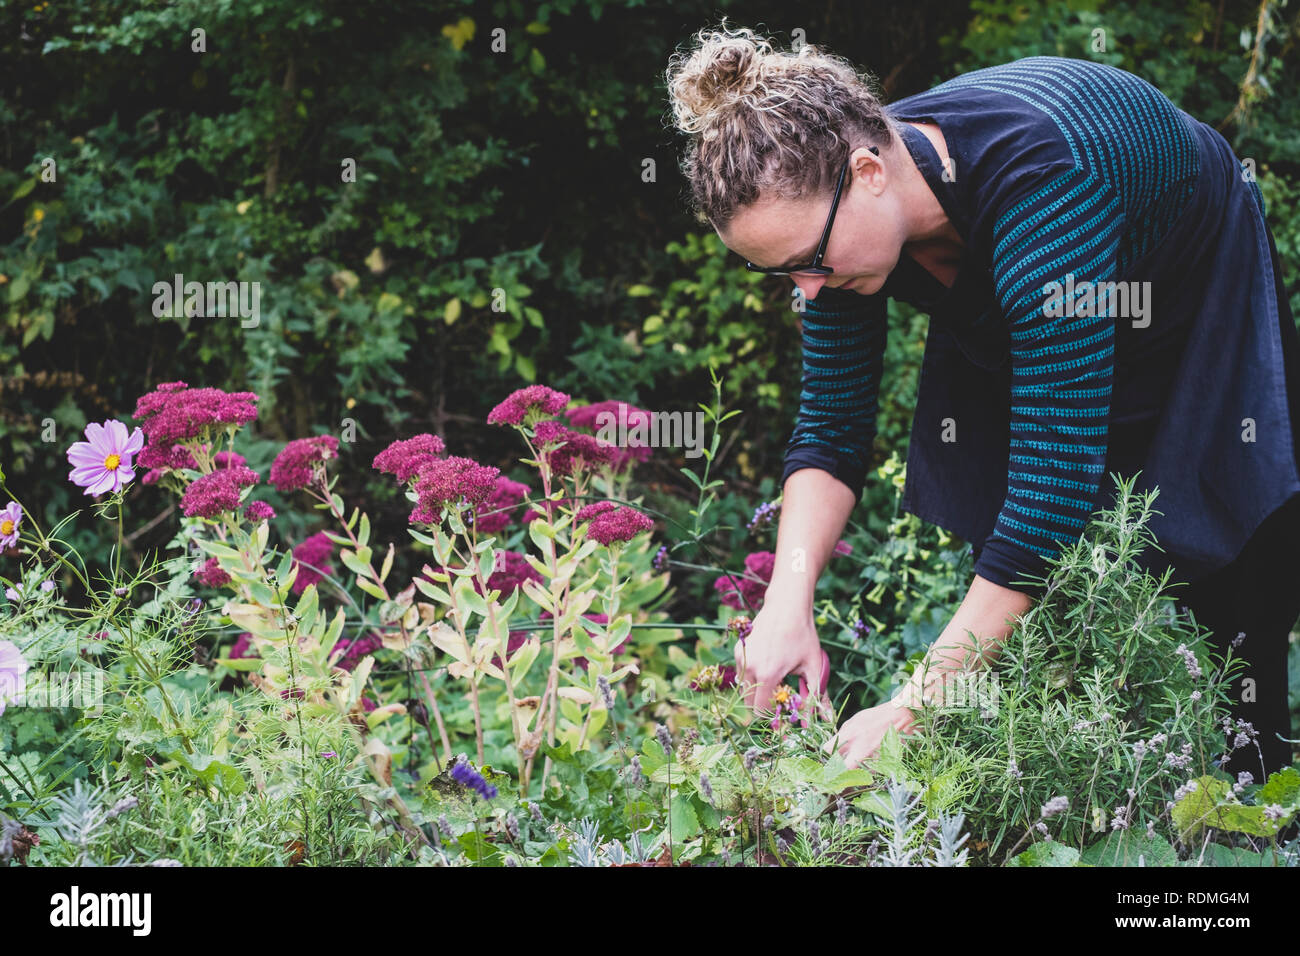 Blonde woman wearing glasses and apron standing in a garde, picking fresh herbs. Stock Photo